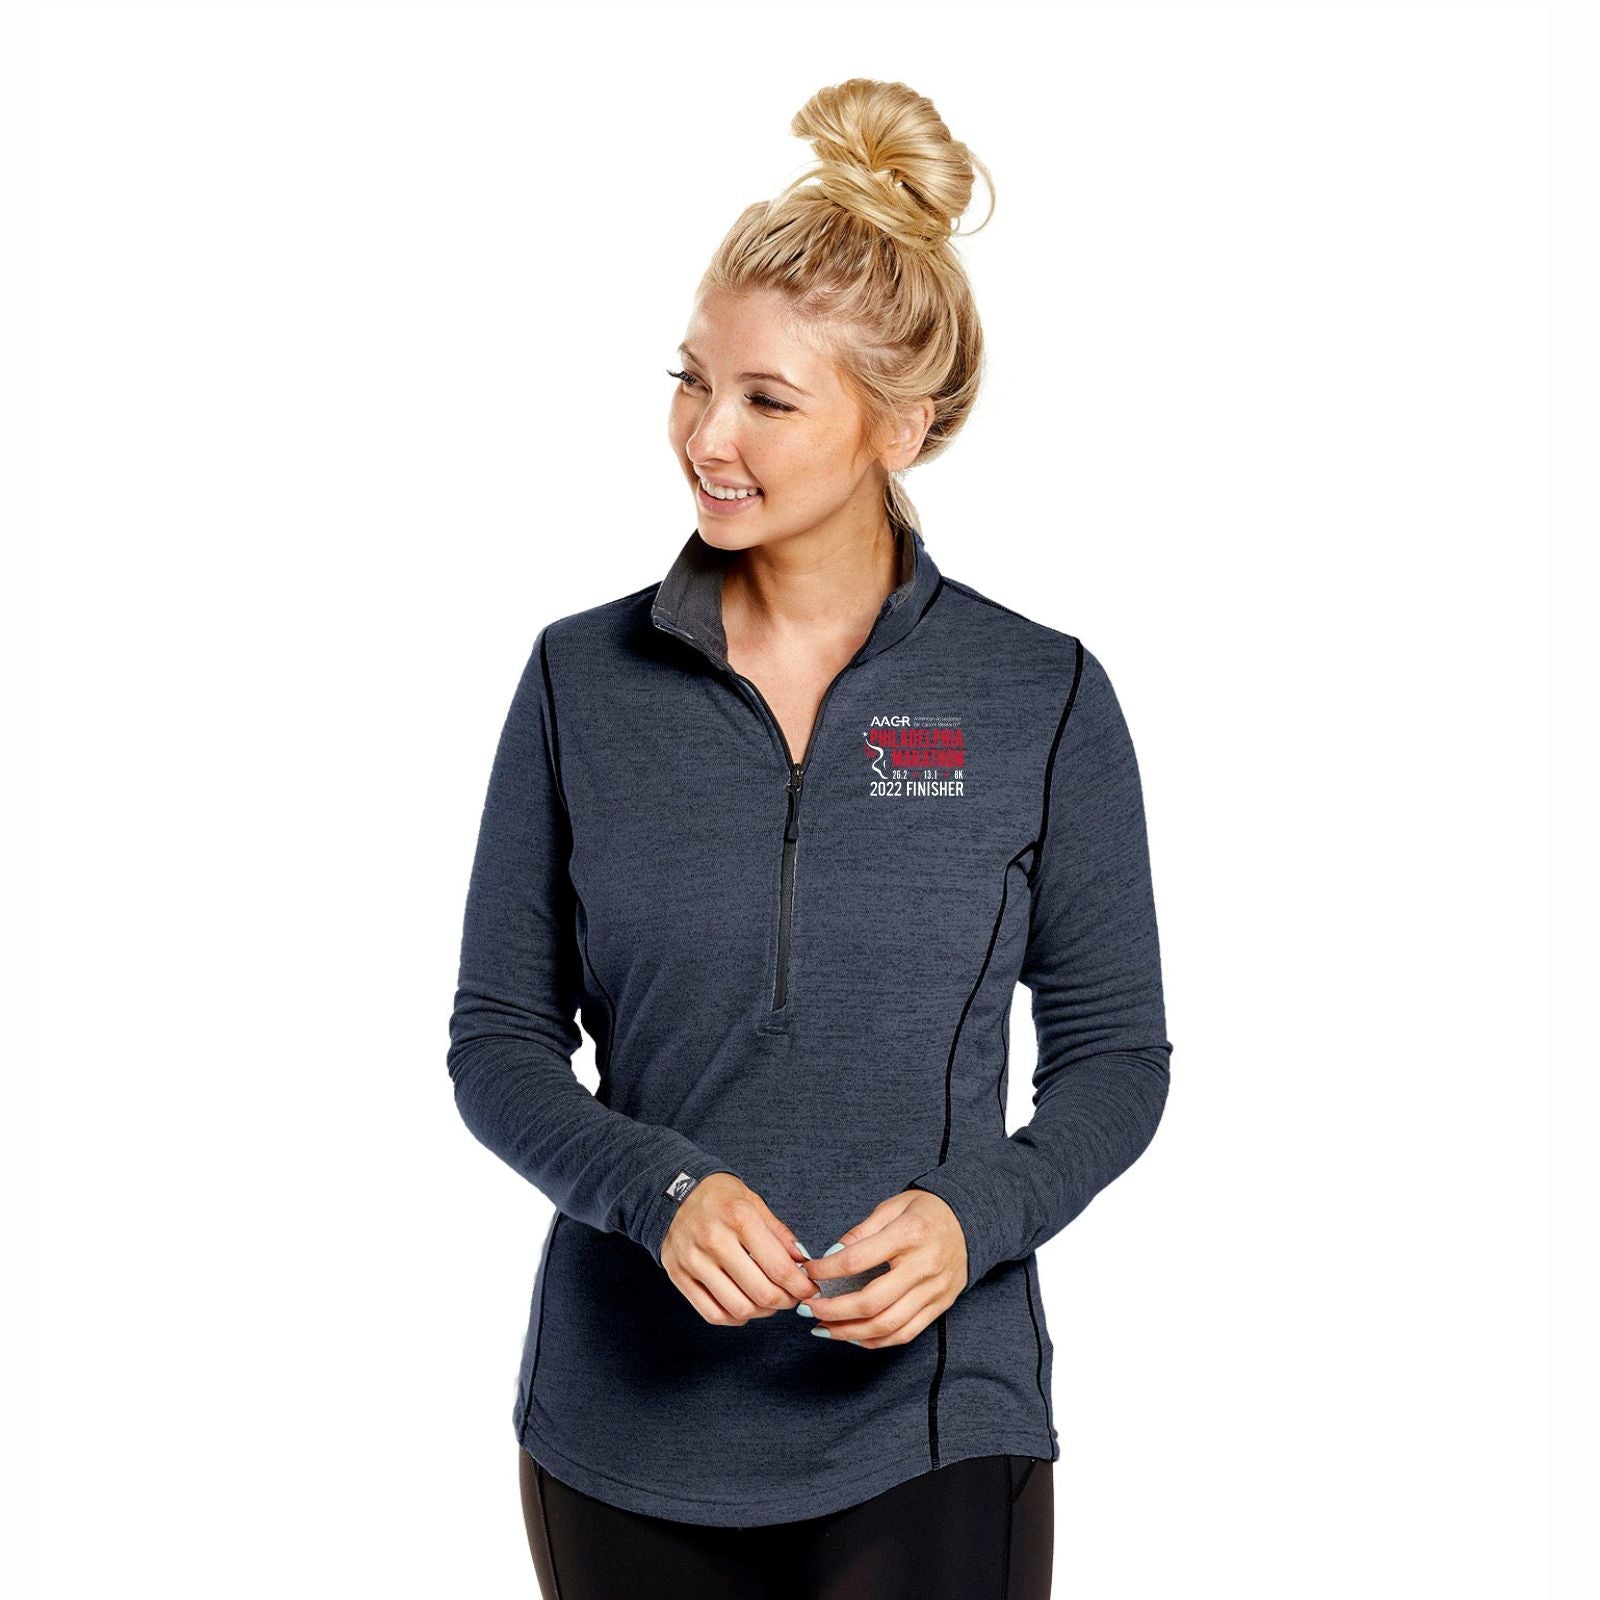 Women's Stretch Tech Eco 1/2 Zip -Navy- AACR 2022 Finisher Embroidery